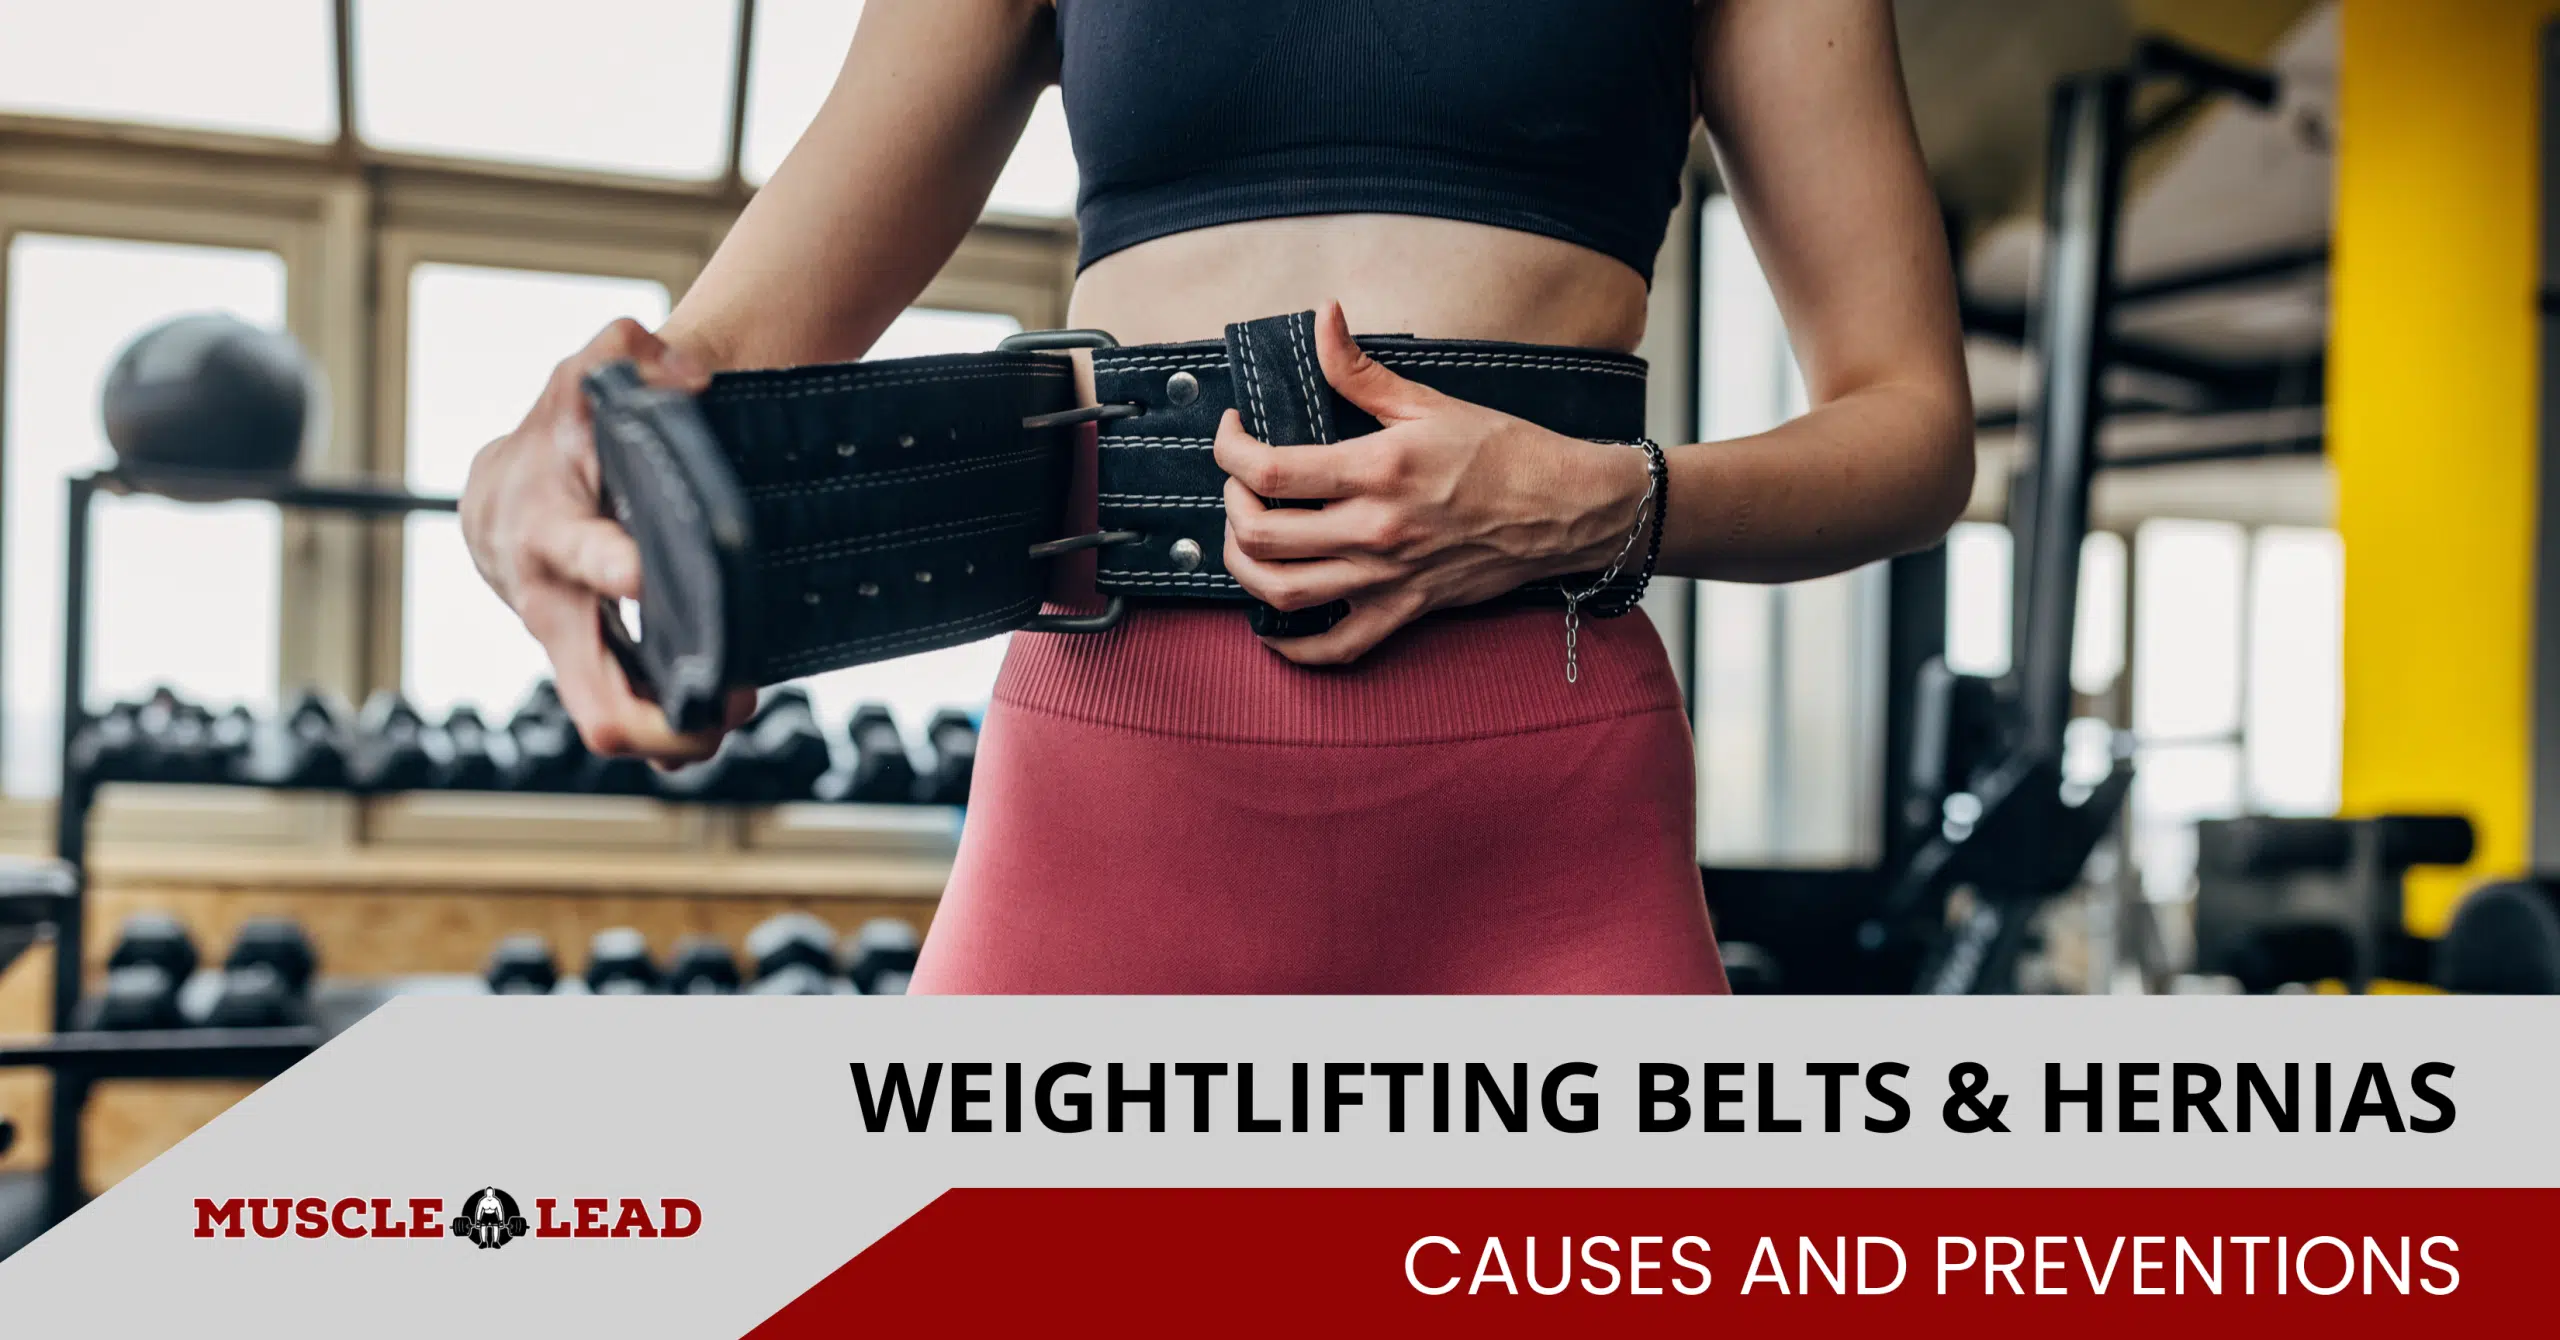 Does The Weightlifting Belt Offer Any Protection From A Hernia